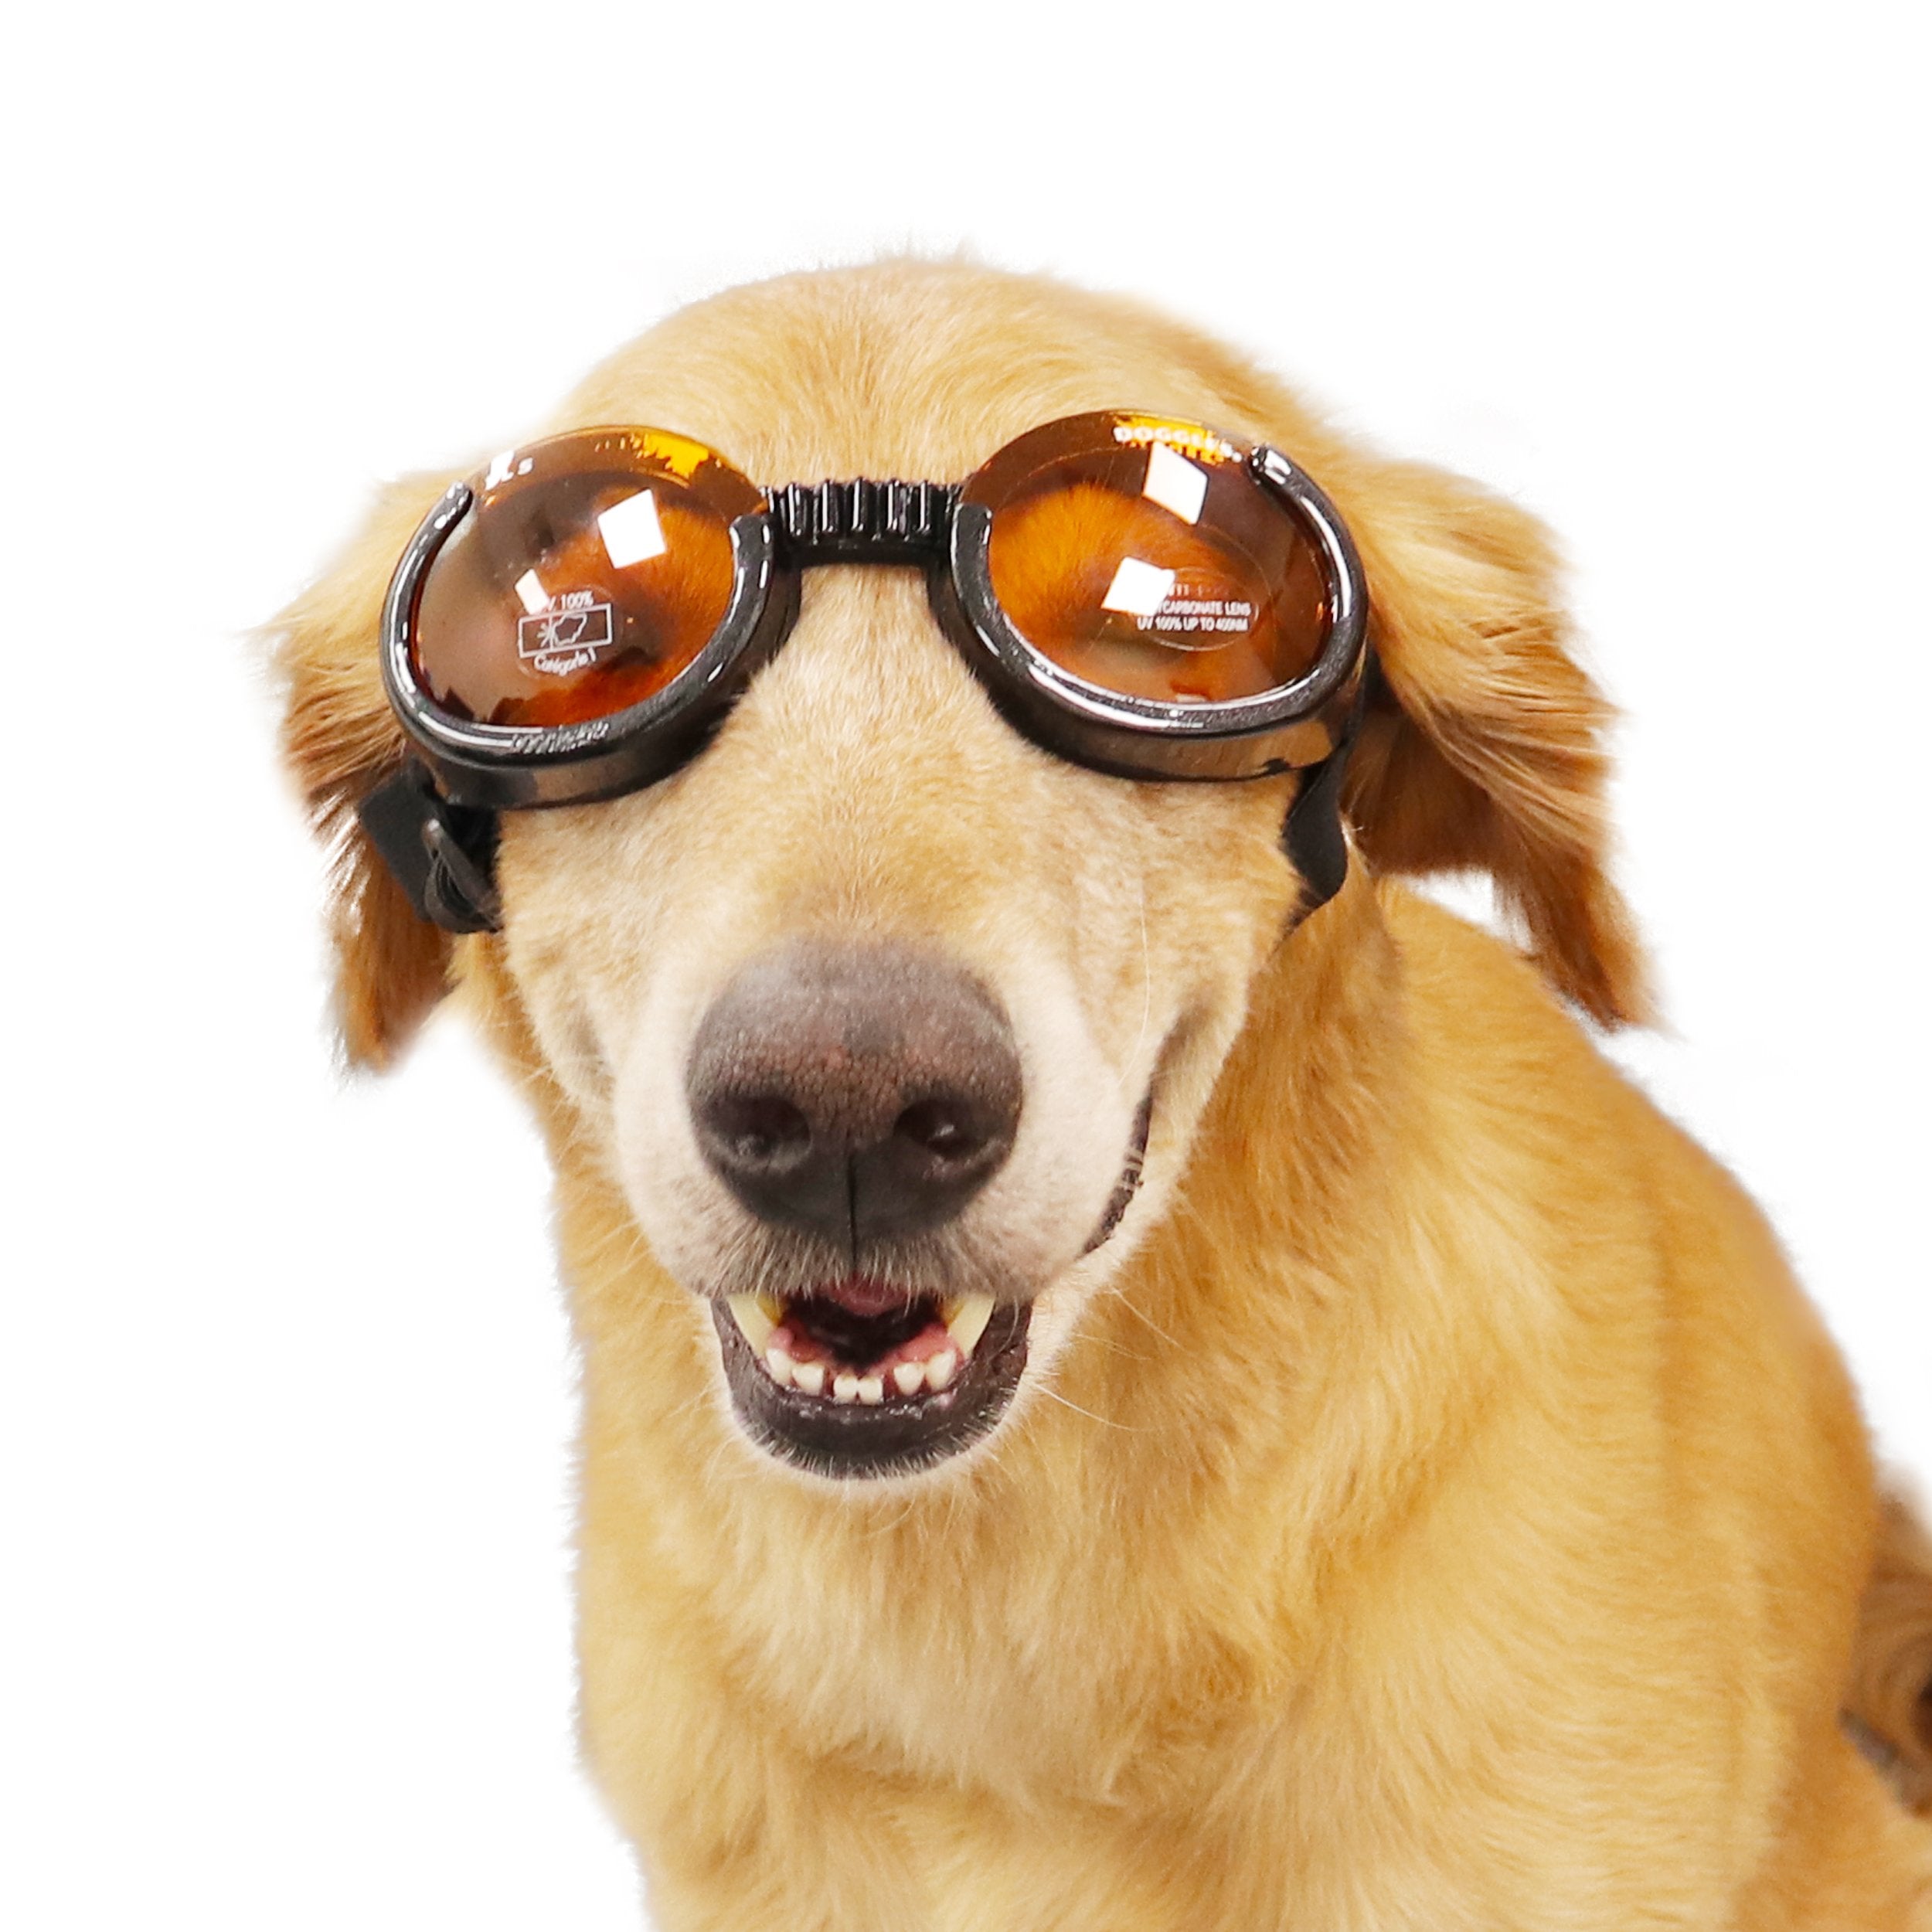 Doggles ILS - Protective Eyewear Glasses for Dogs